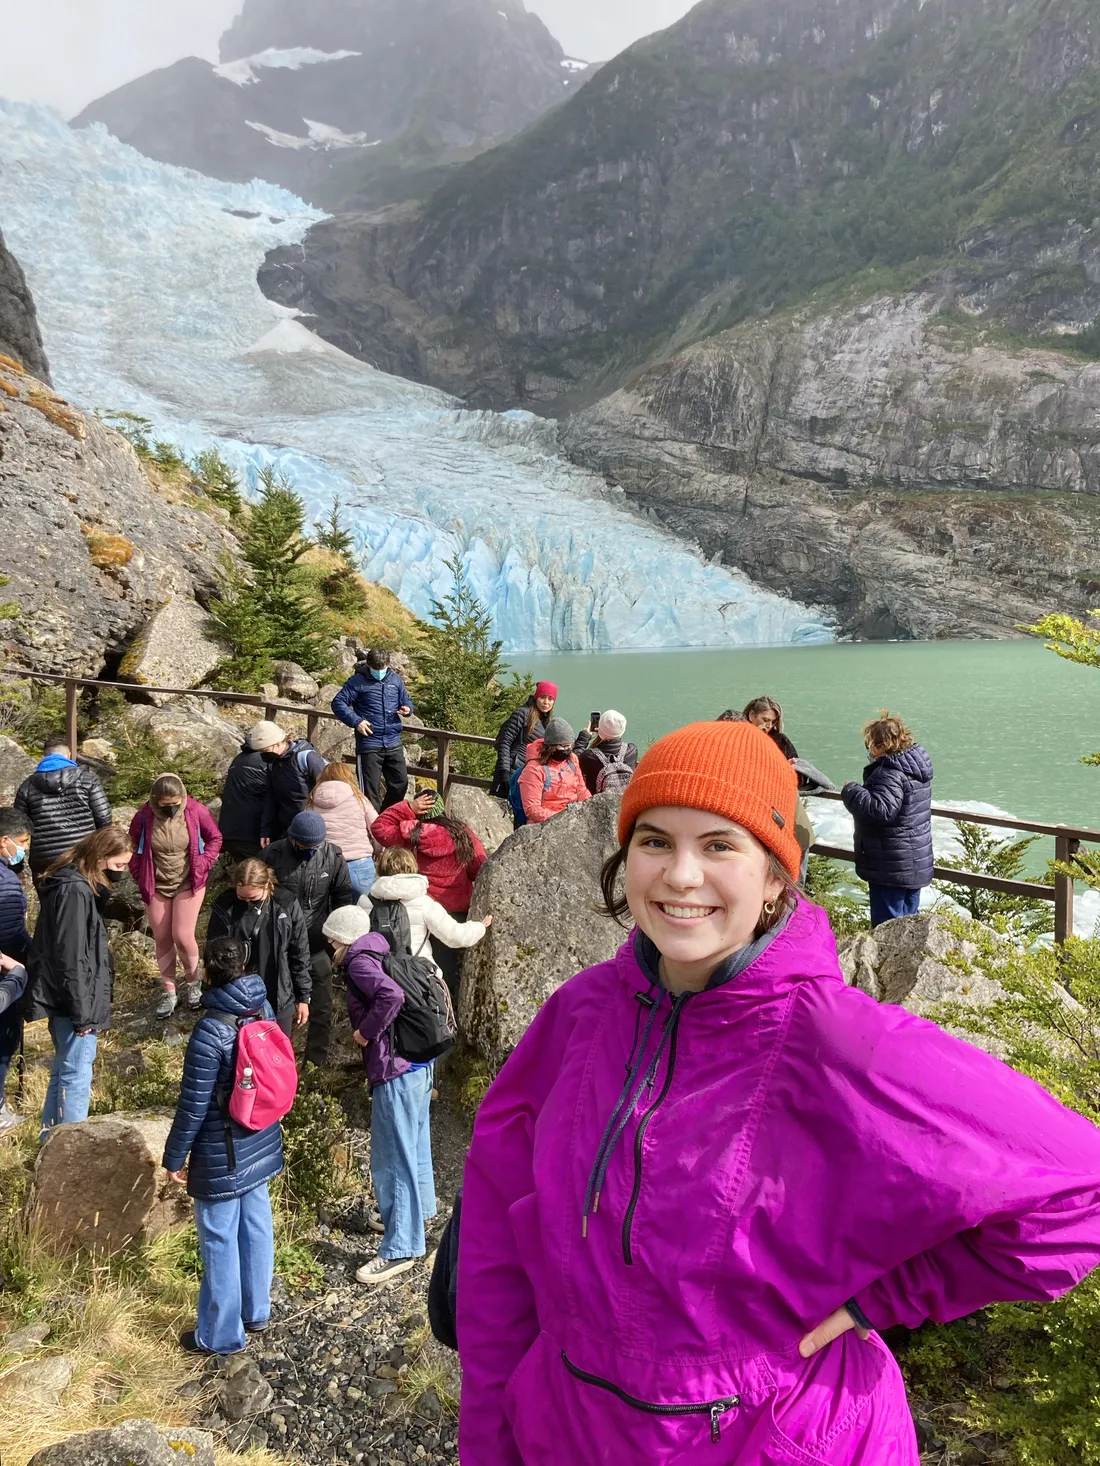 Sophie Clinton posses in front of scenic overlook of glacier carving out valley.